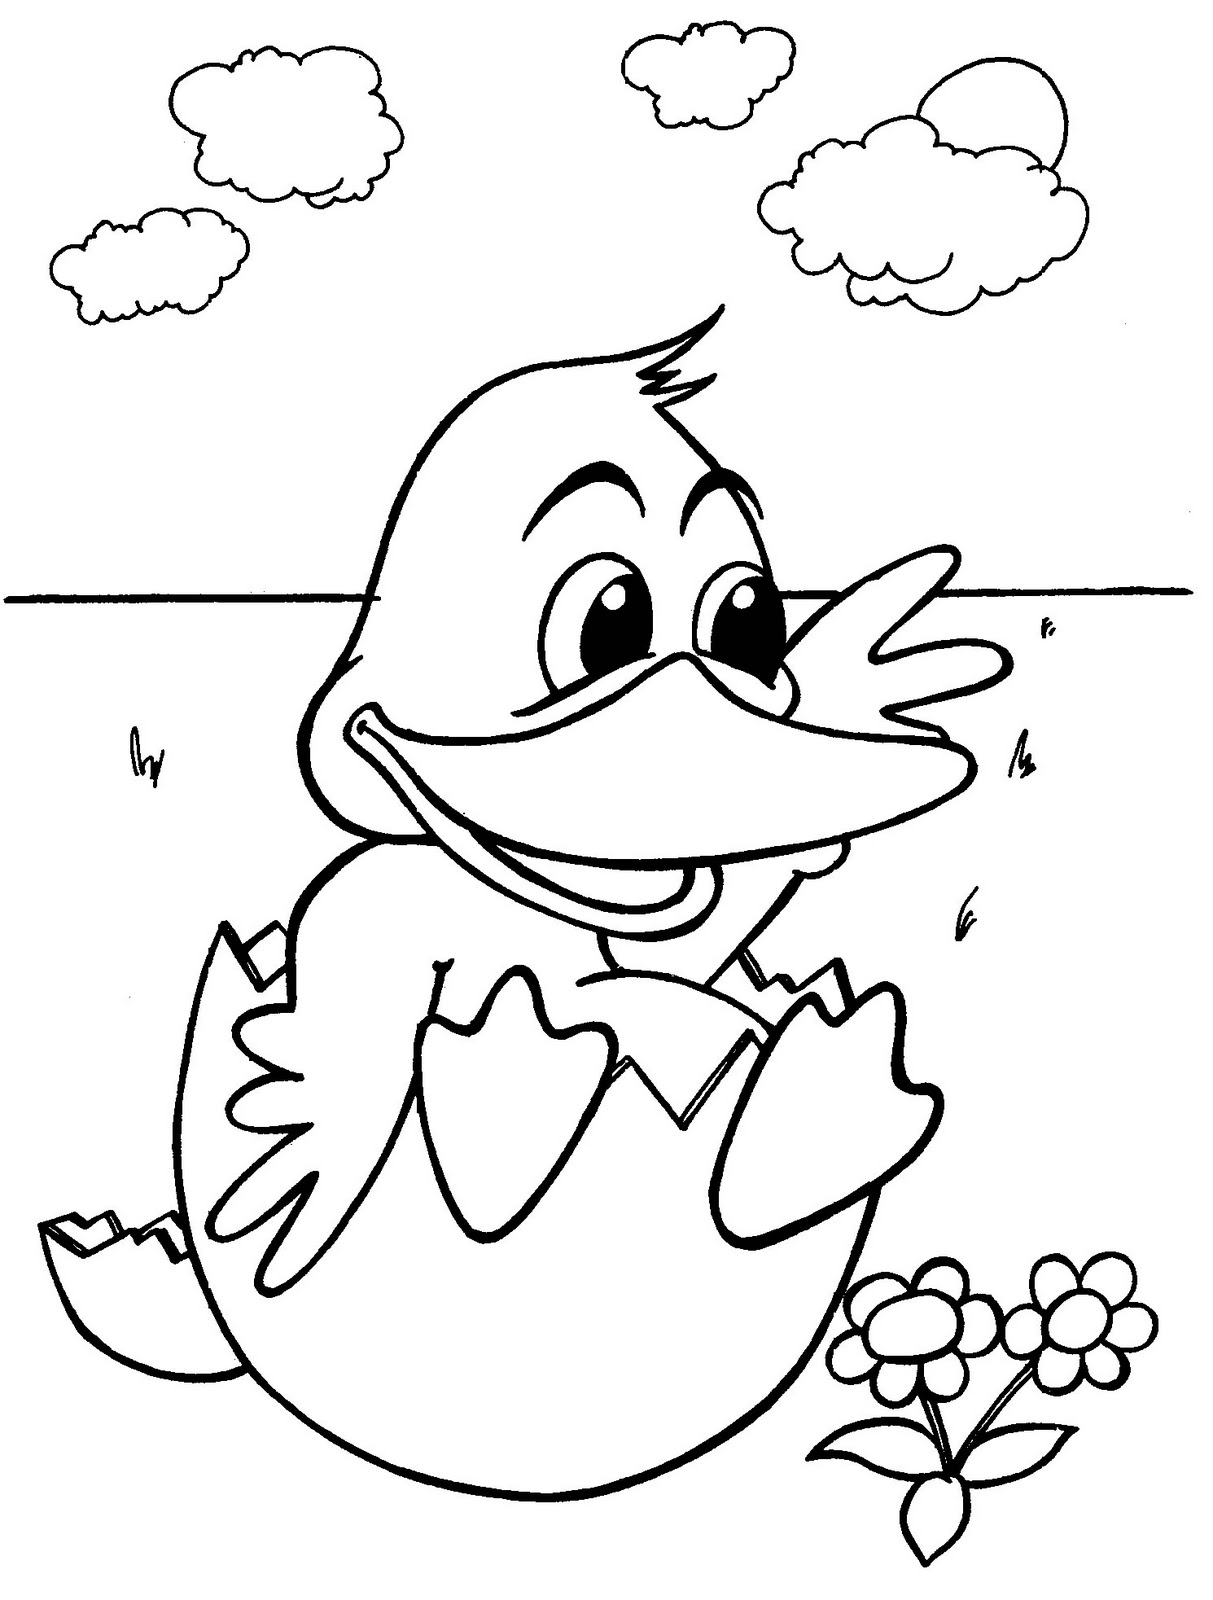 Download coloring: Baby animals coloring pages